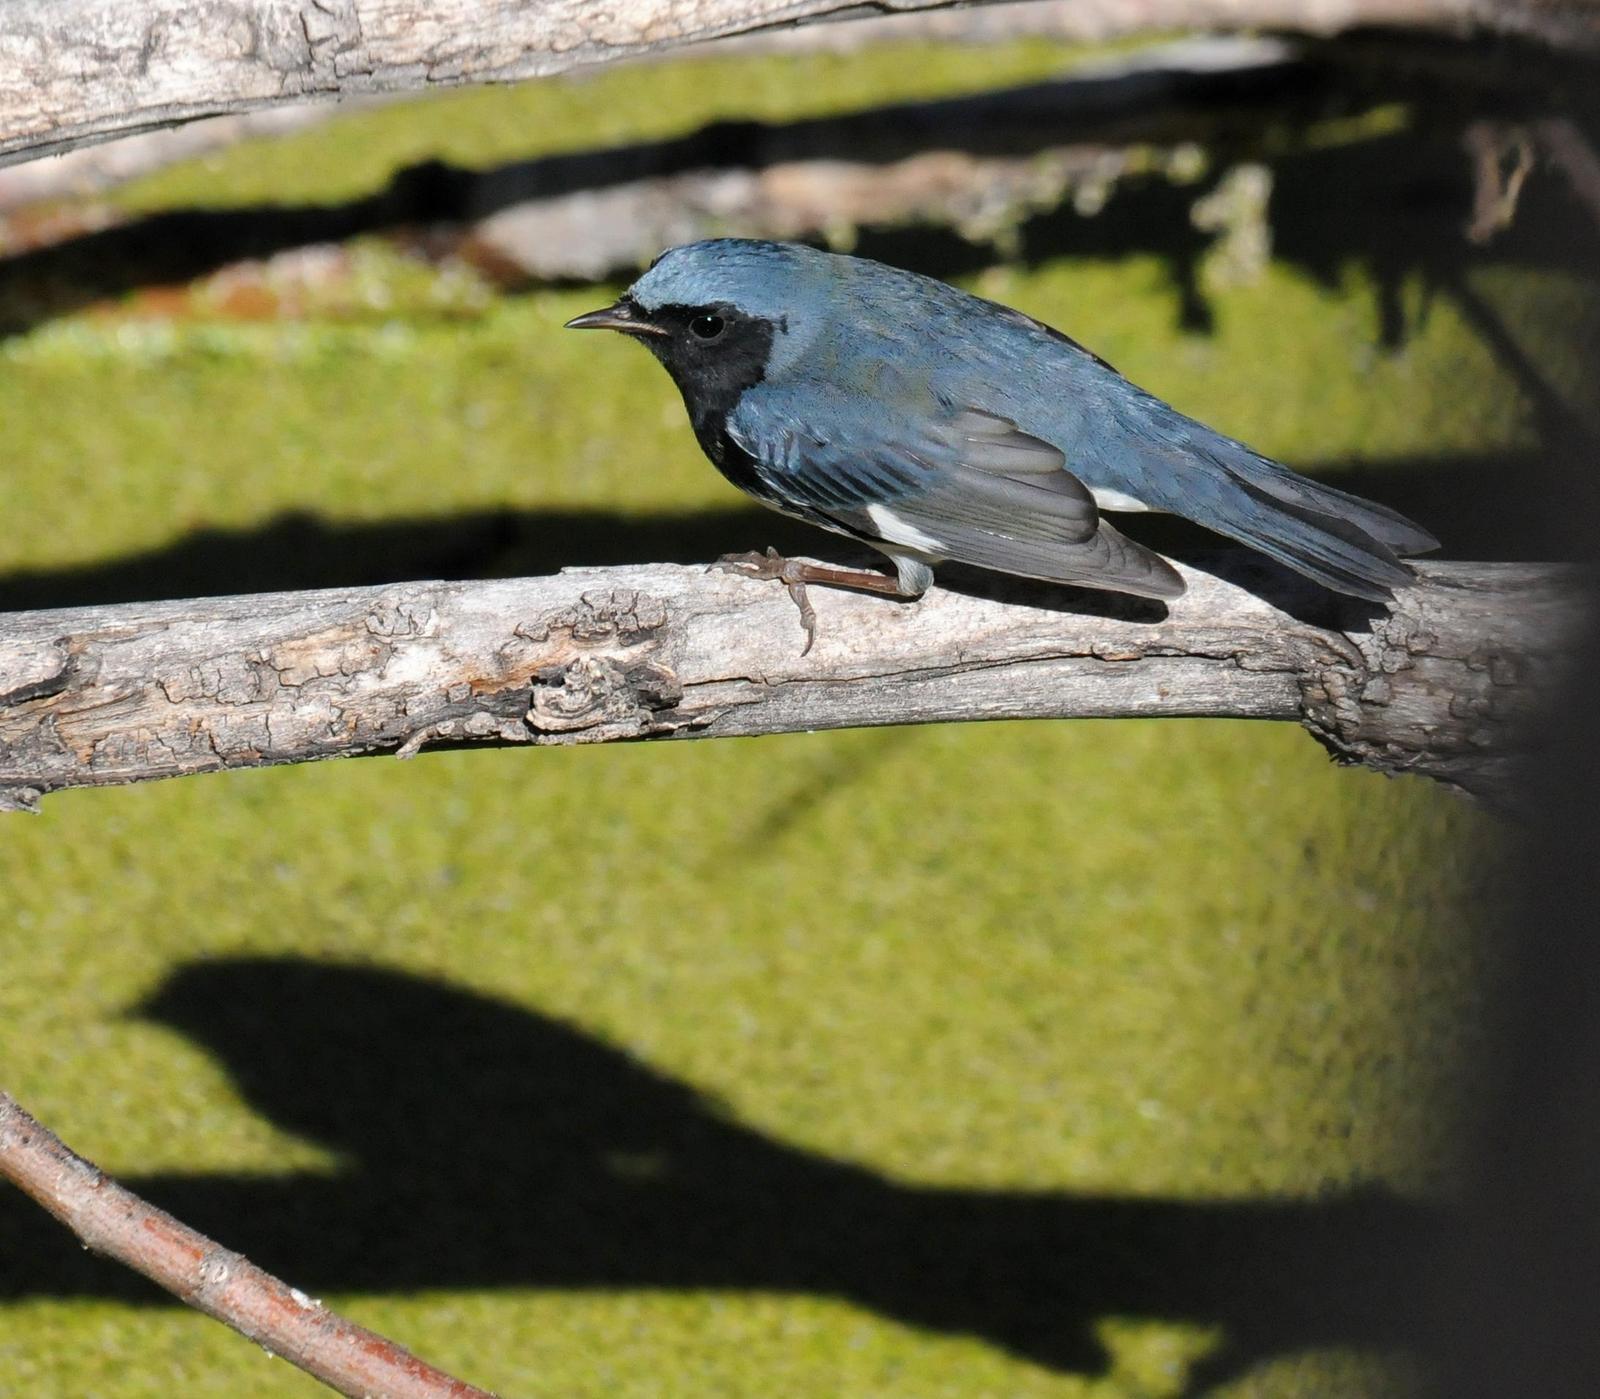 Black-throated Blue Warbler Photo by Steven Mlodinow